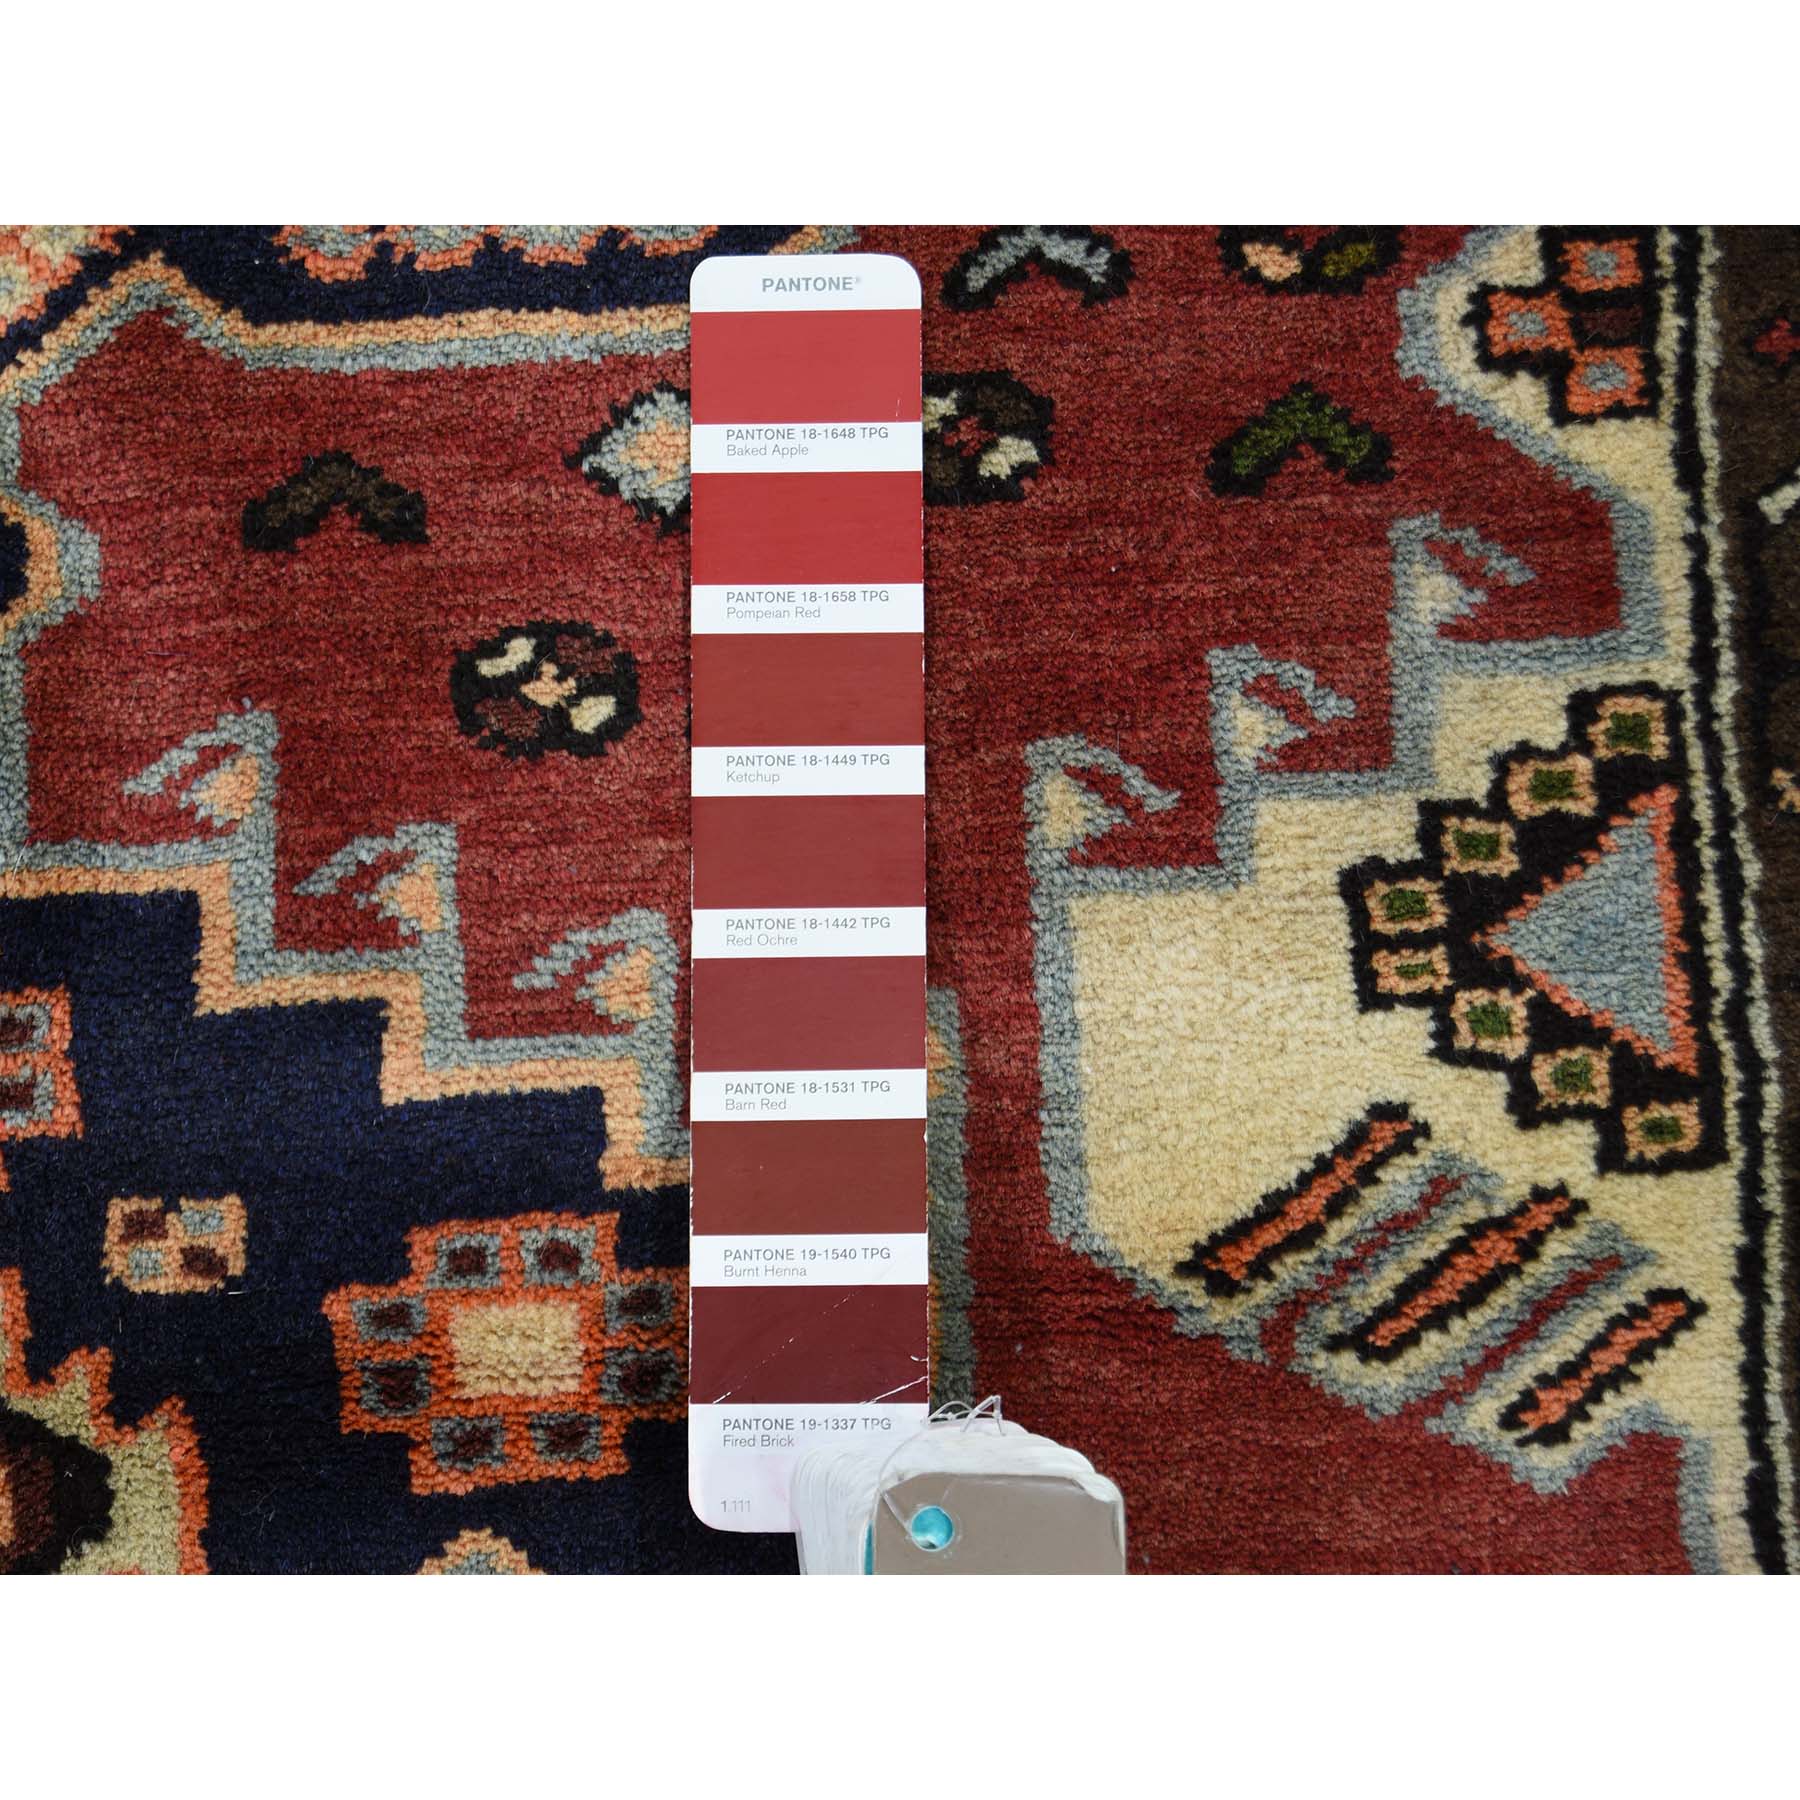 3-5 x6-8  Pure Wool Hand-Knotted New Persian Hamadan Oriental Rug 